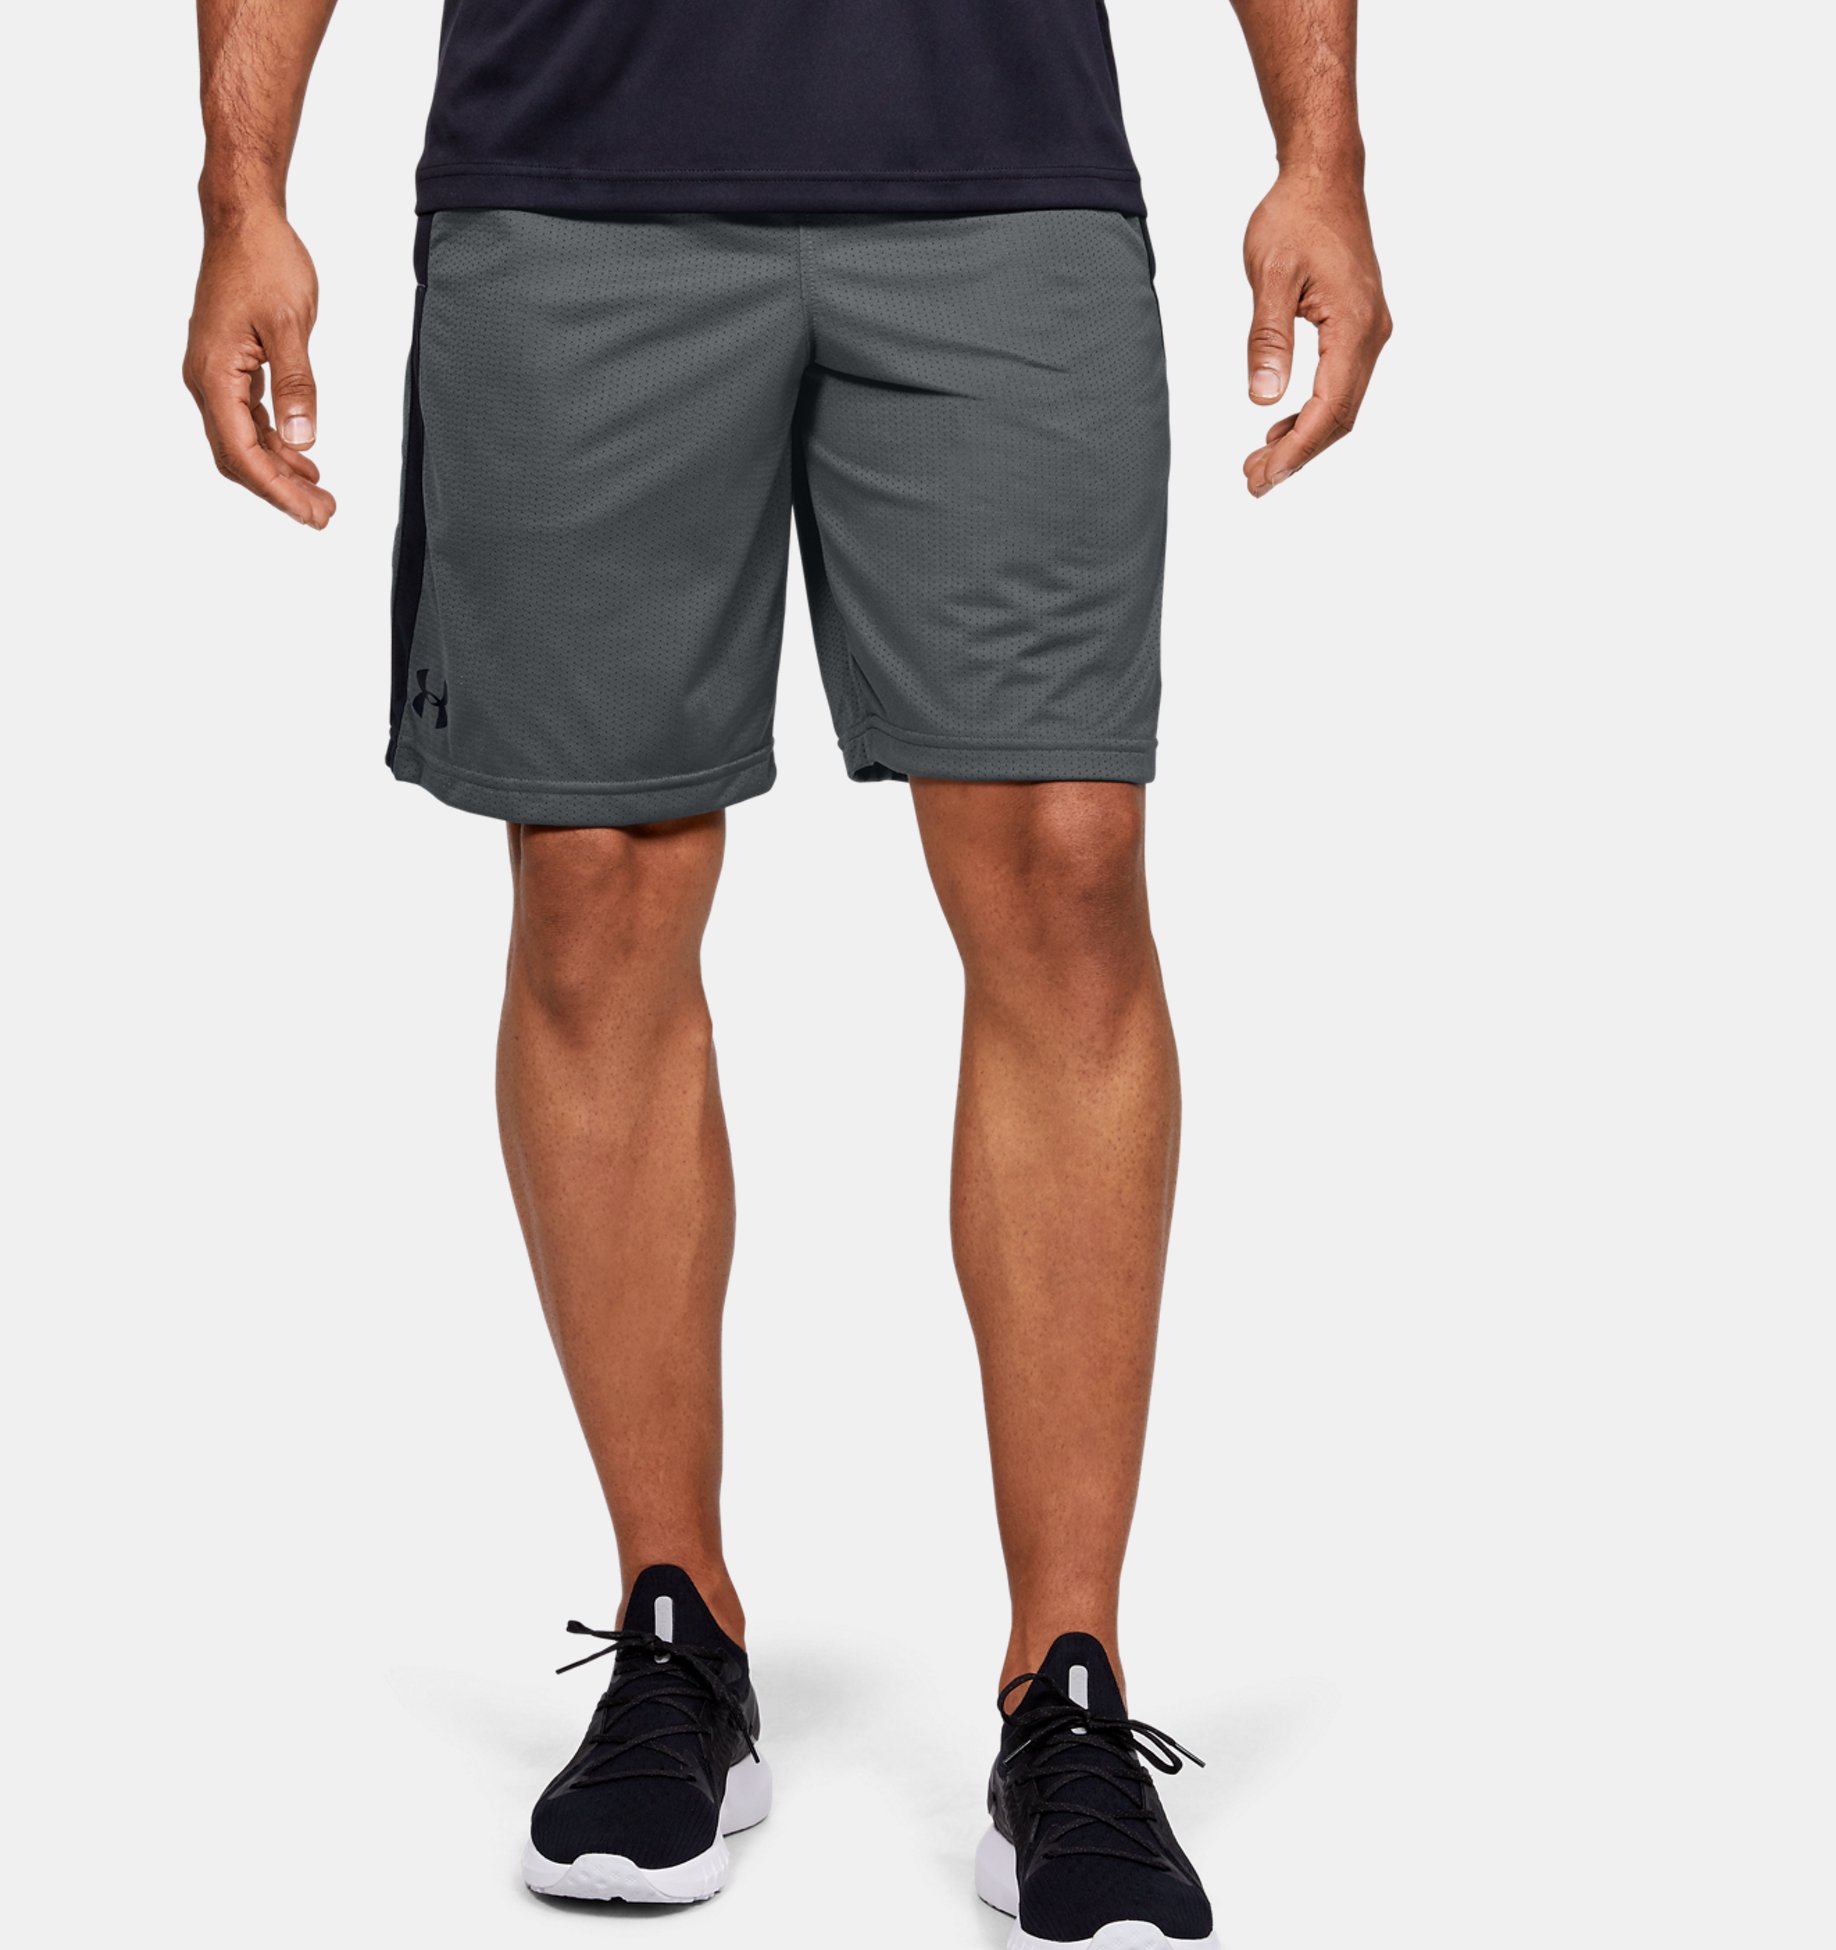 Under Armour Outlet: Additional 30% Off Sale Items: Men's UA Shorts (various) $10.49, Women's UA Play Up 2.0 Shorts $10.49, Much More + Free shipping